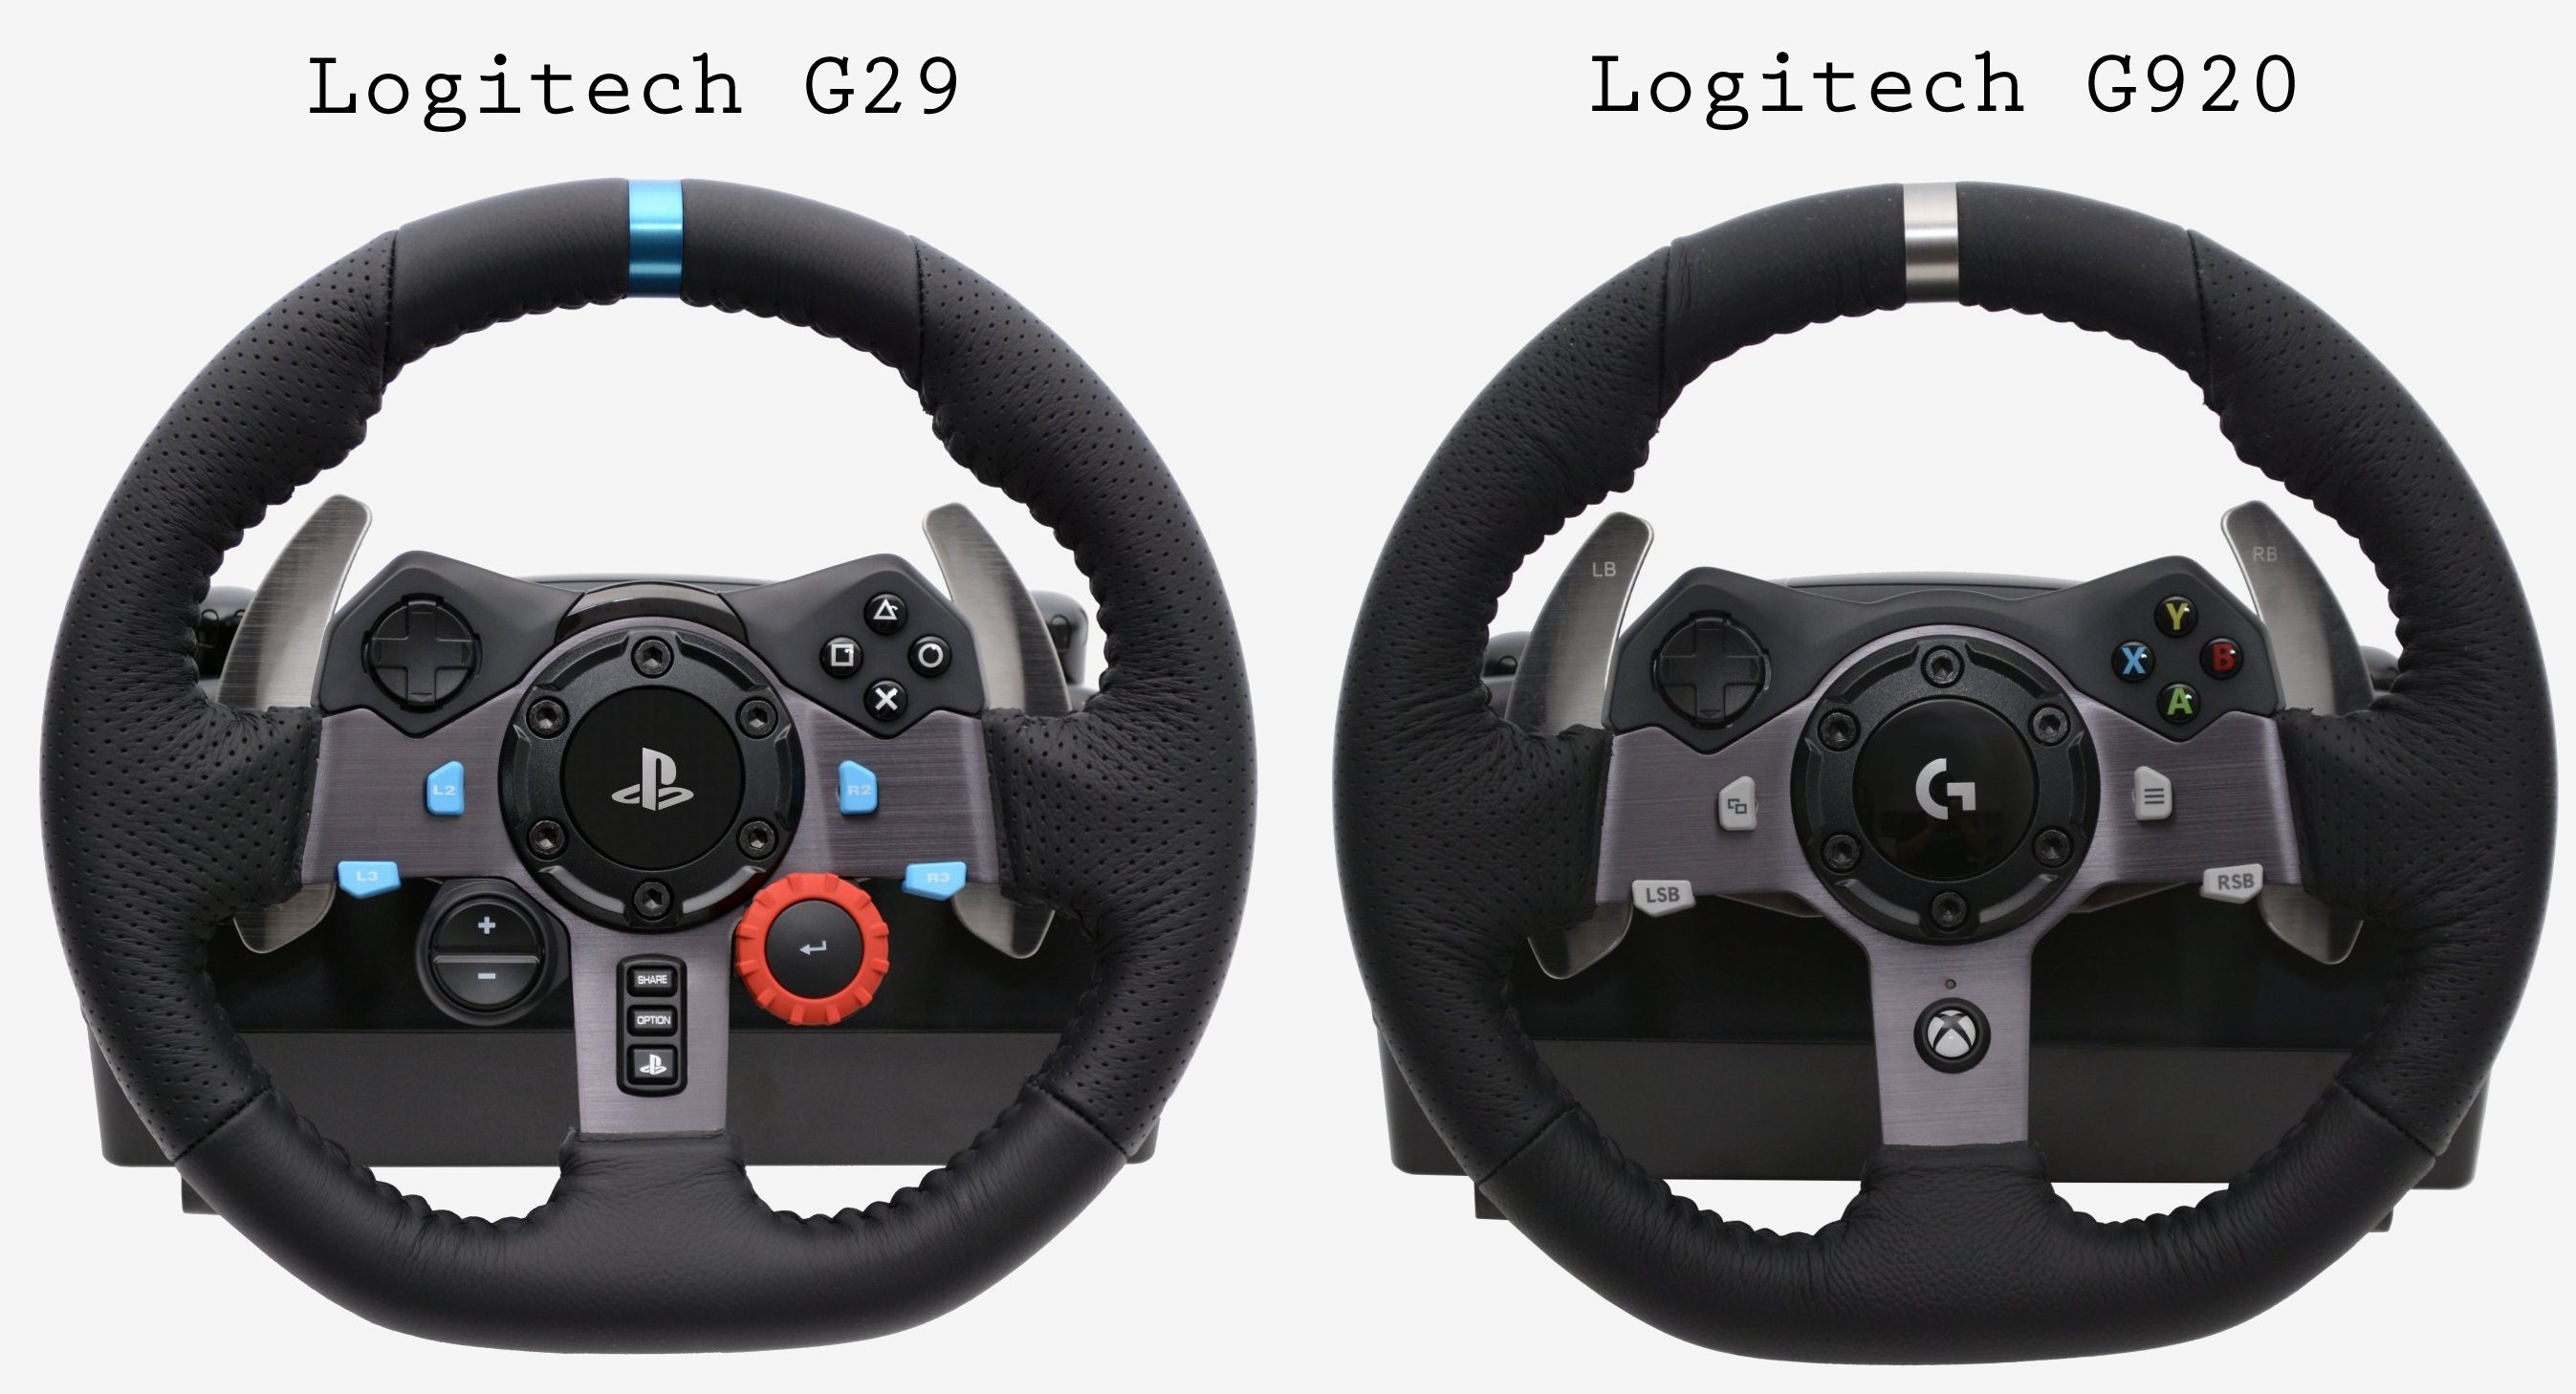 Steam :: Guide Help setting up a G29 / G920 Steering Wheel for Wreckfest and Windows